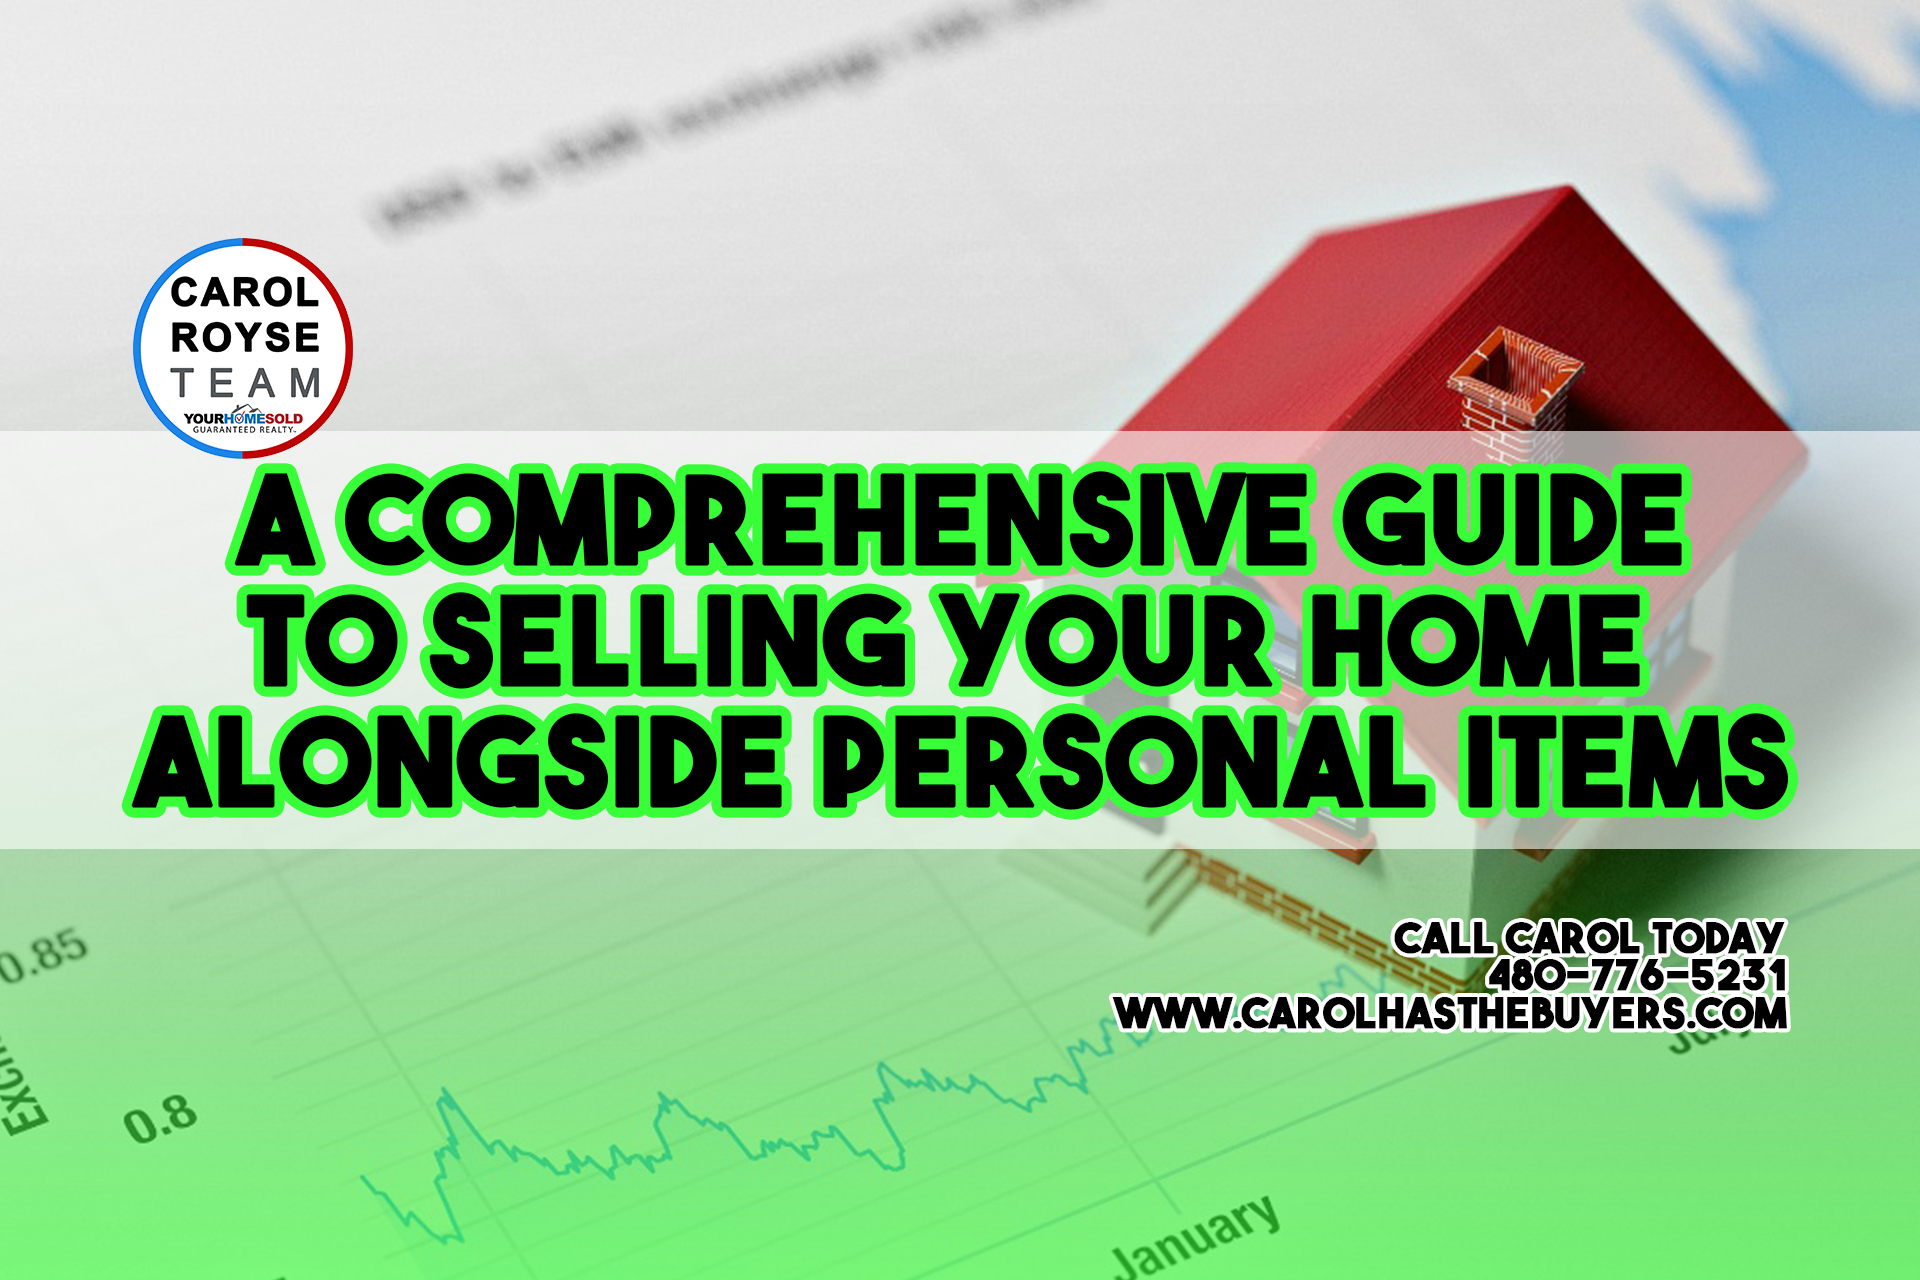 A Comprehensive Guide to Selling Your Home Alongside Personal Items